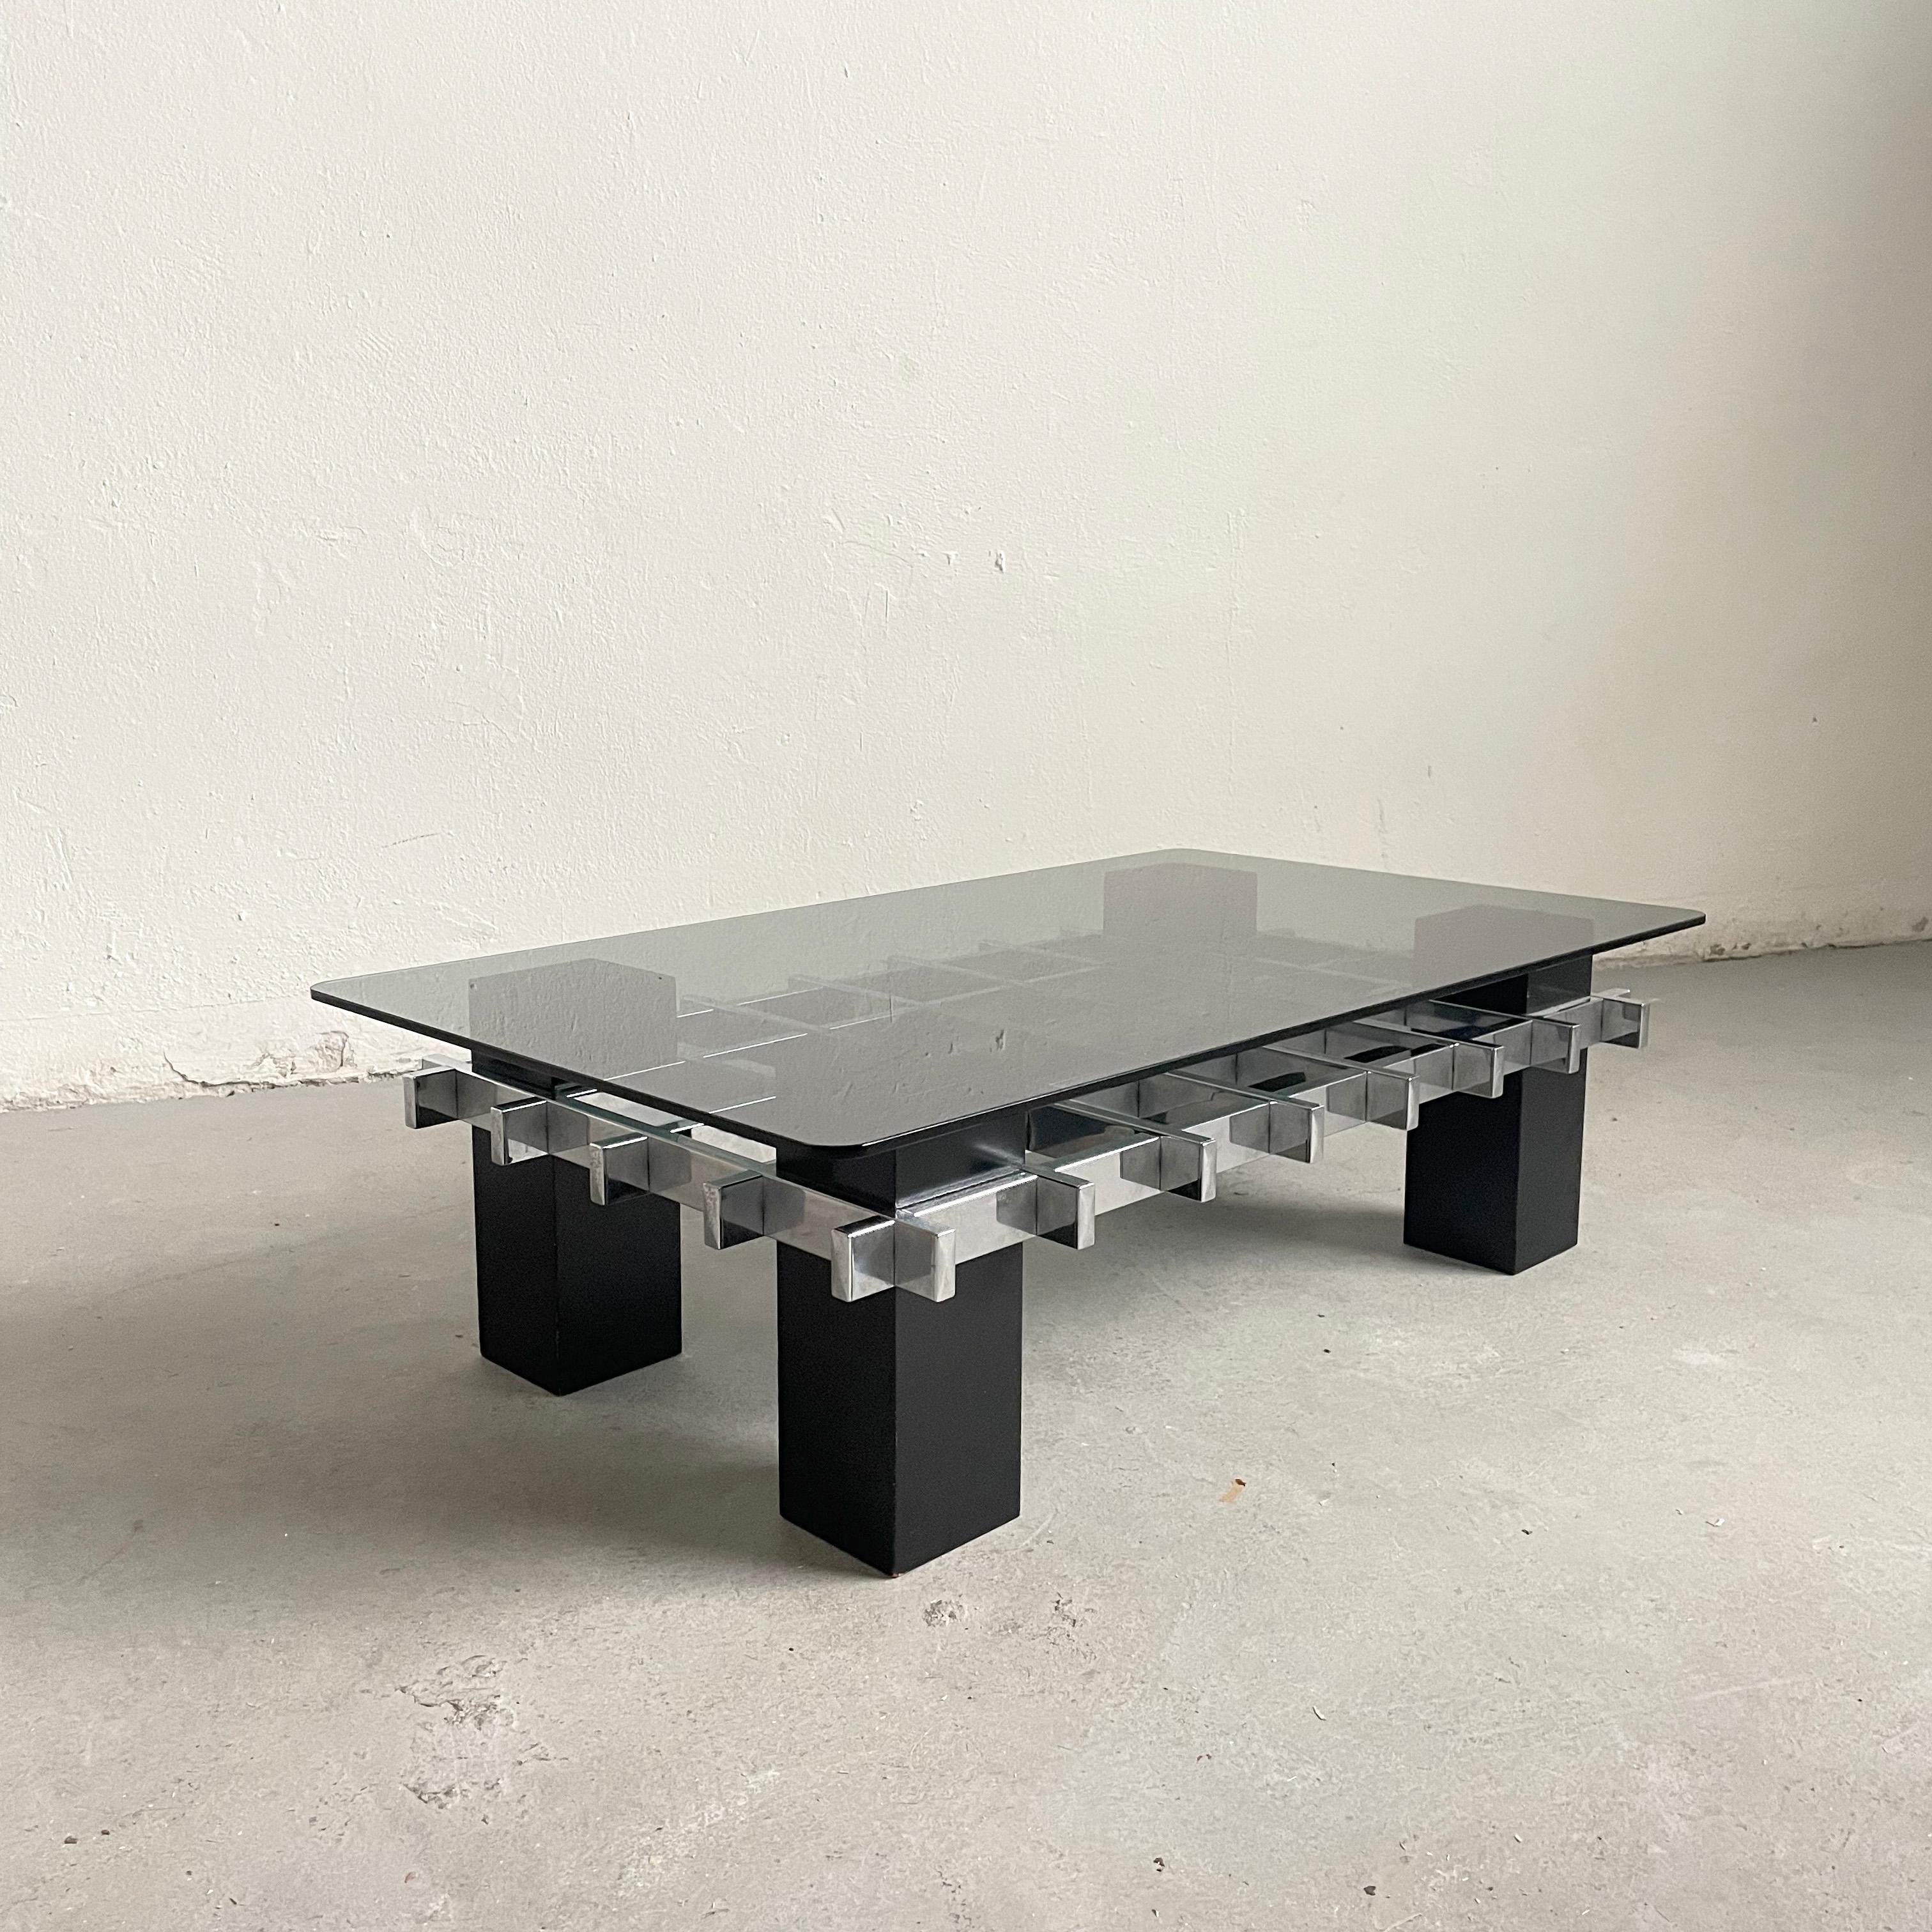 A beautiful coffee table with a unique geometric design. The design is attributed to Milo Baughman and it is made in the USA around the late 1960s or early 1970s. 

It has rectangular black wood legs that support a rectangular tinted glass plate